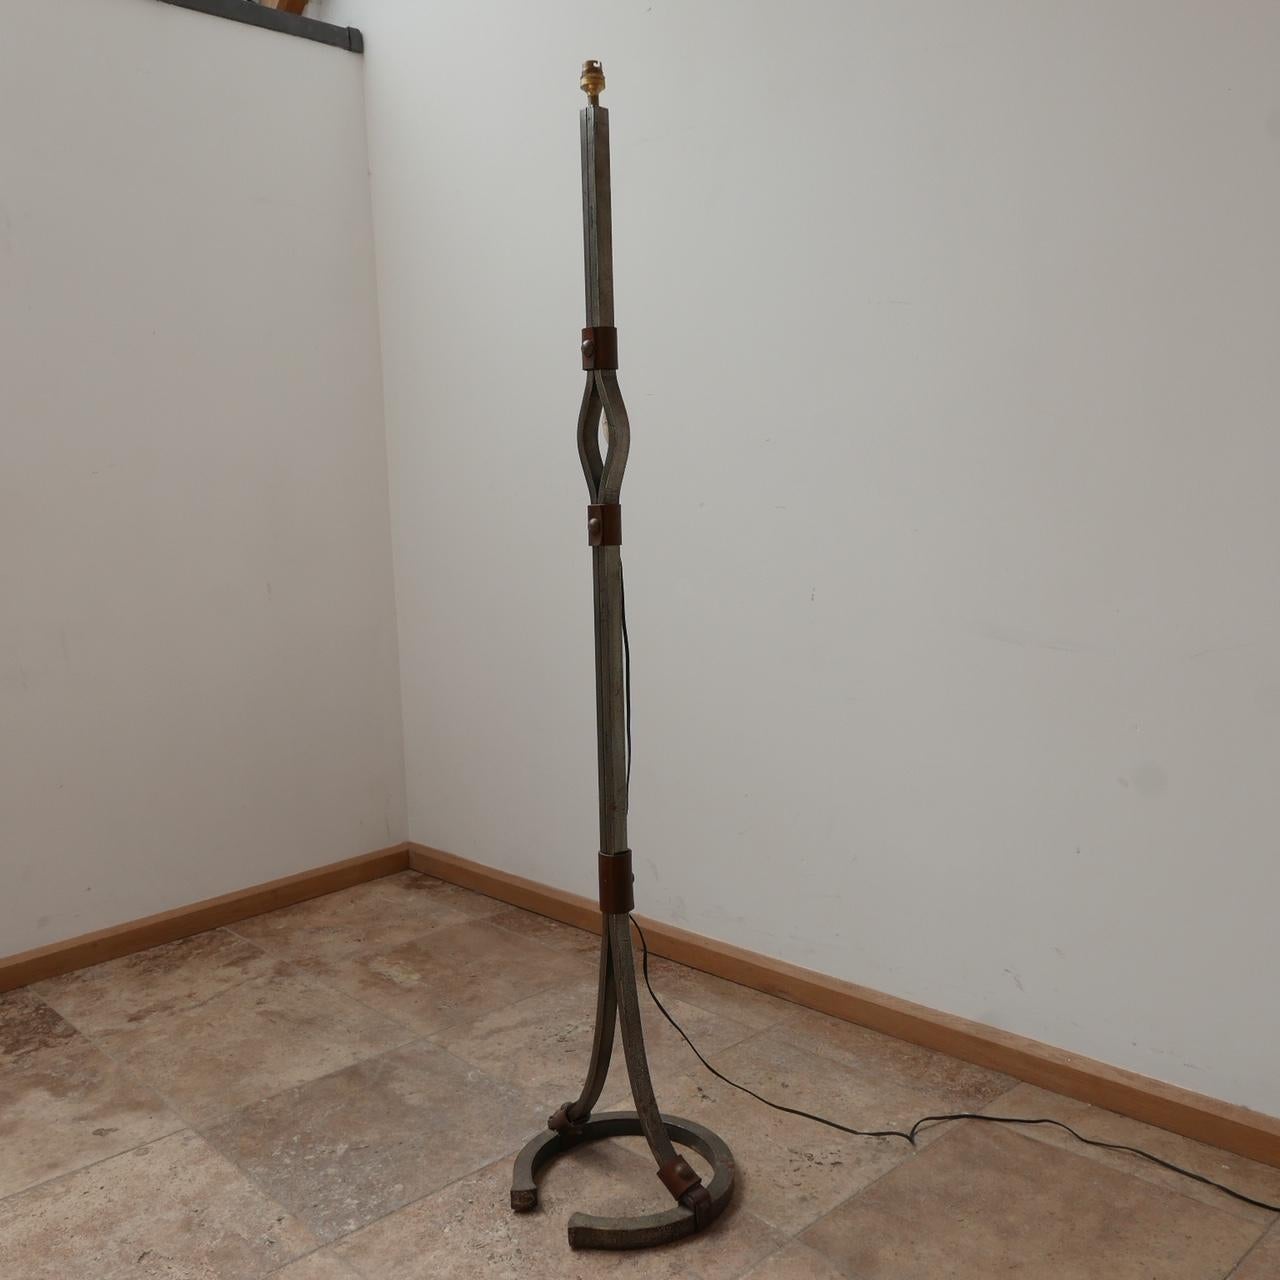 A stylish floor lamp by Jean-Pierre Ryckaert.

France, circa 1950s. 

Leather and iron. 

Often attributed to Jacques Adnet because of the quality and style. 

Good condition, one small metal plug is missing to the base (see photos).